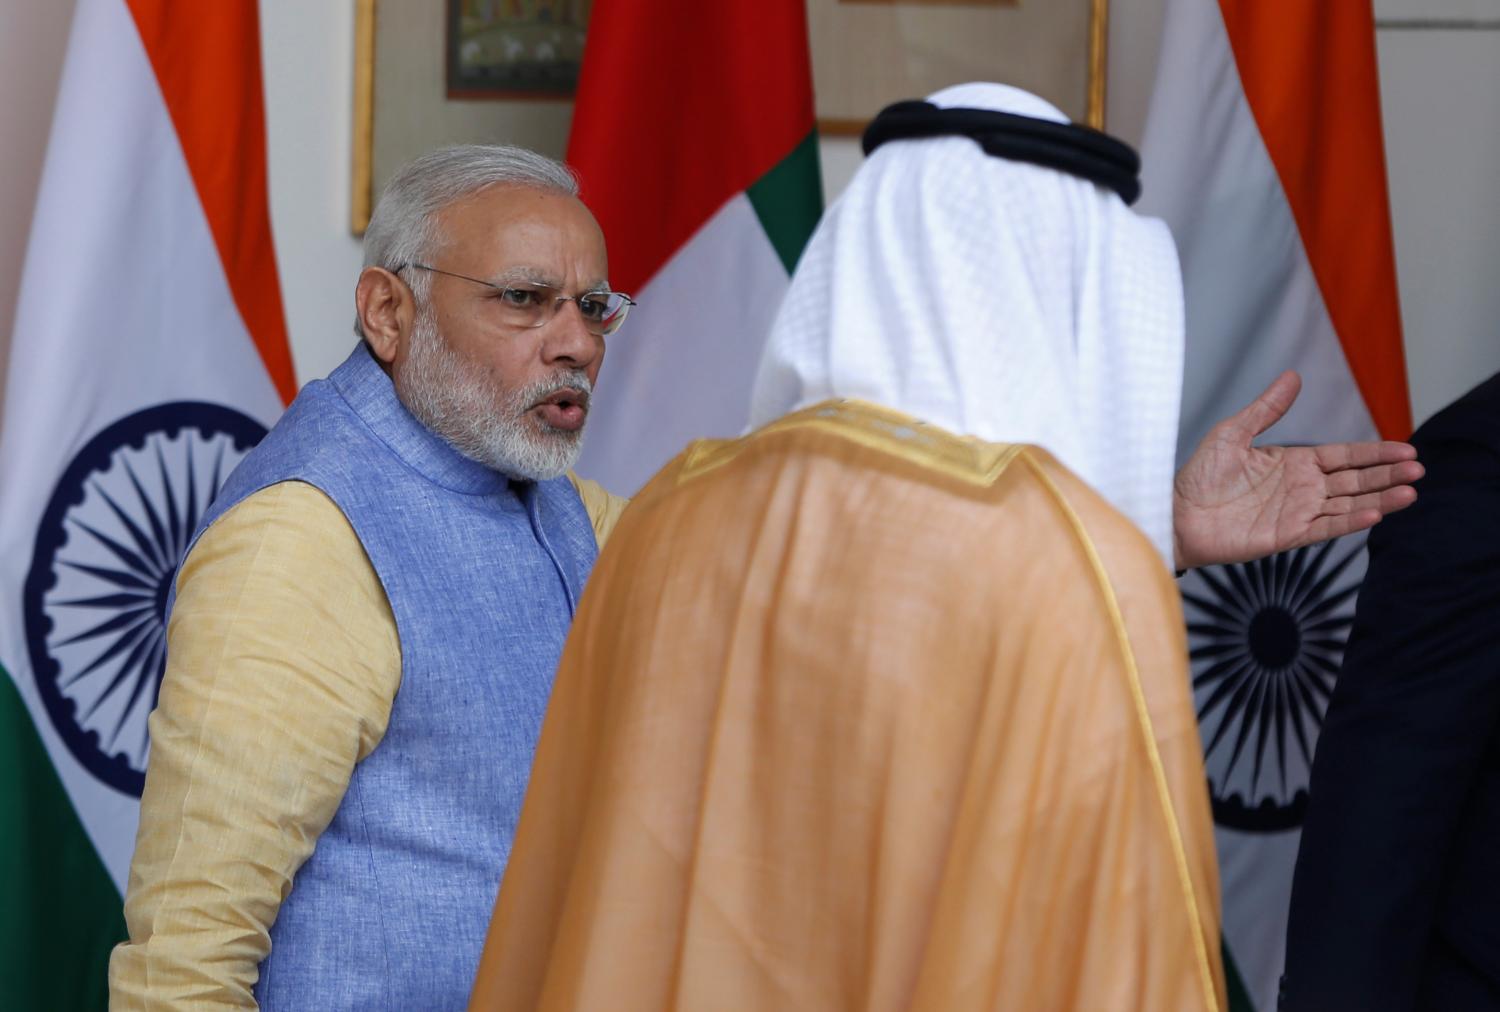 Sheikh Mohammed bin Zayed al-Nahyan, Crown Prince of Abu Dhabi and UAE's deputy commander-in-chief of the armed forces, and India's Prime Minister Narendra Modi (L) arrive for a photo opportunity ahead of their meeting at Hyderabad House in New Delhi, India, January 25, 2017. REUTERS/Adnan Abidi